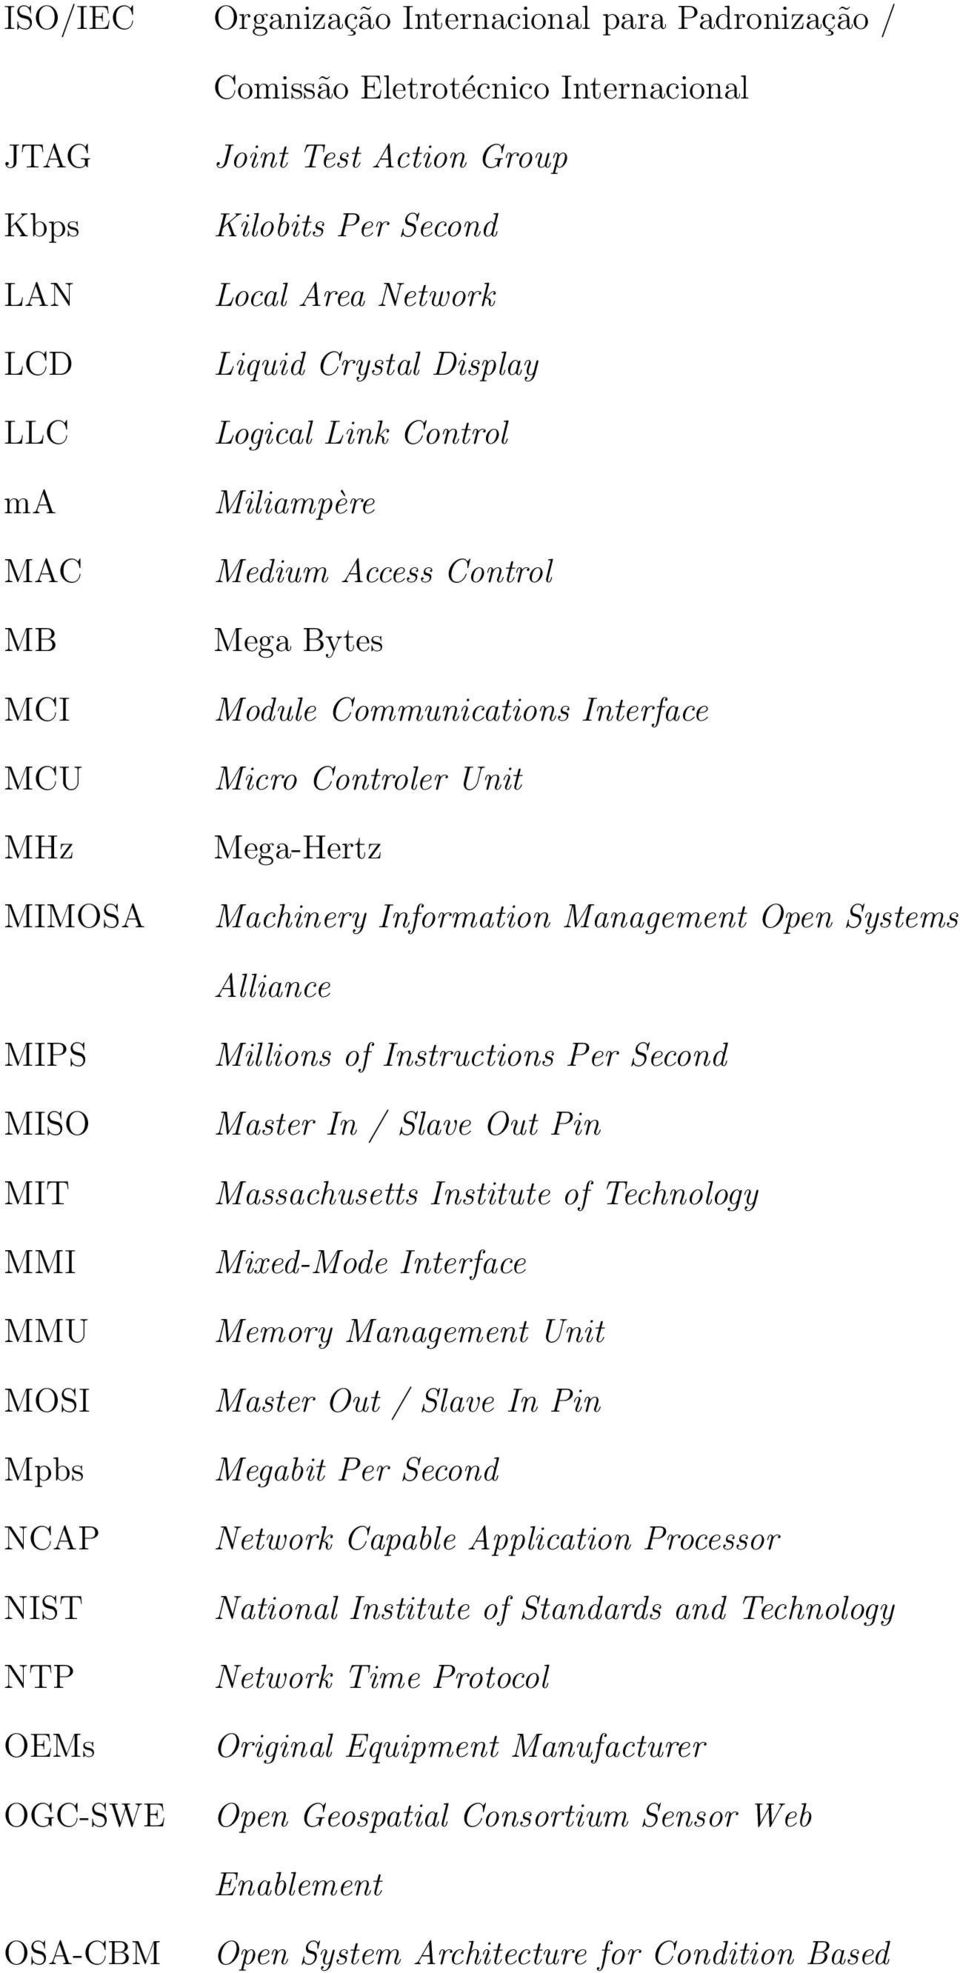 Systems Alliance MIPS MISO MIT MMI MMU MOSI Mpbs NCAP NIST NTP OEMs OGC-SWE Millions of Instructions Per Second Master In / Slave Out Pin Massachusetts Institute of Technology Mixed-Mode Interface